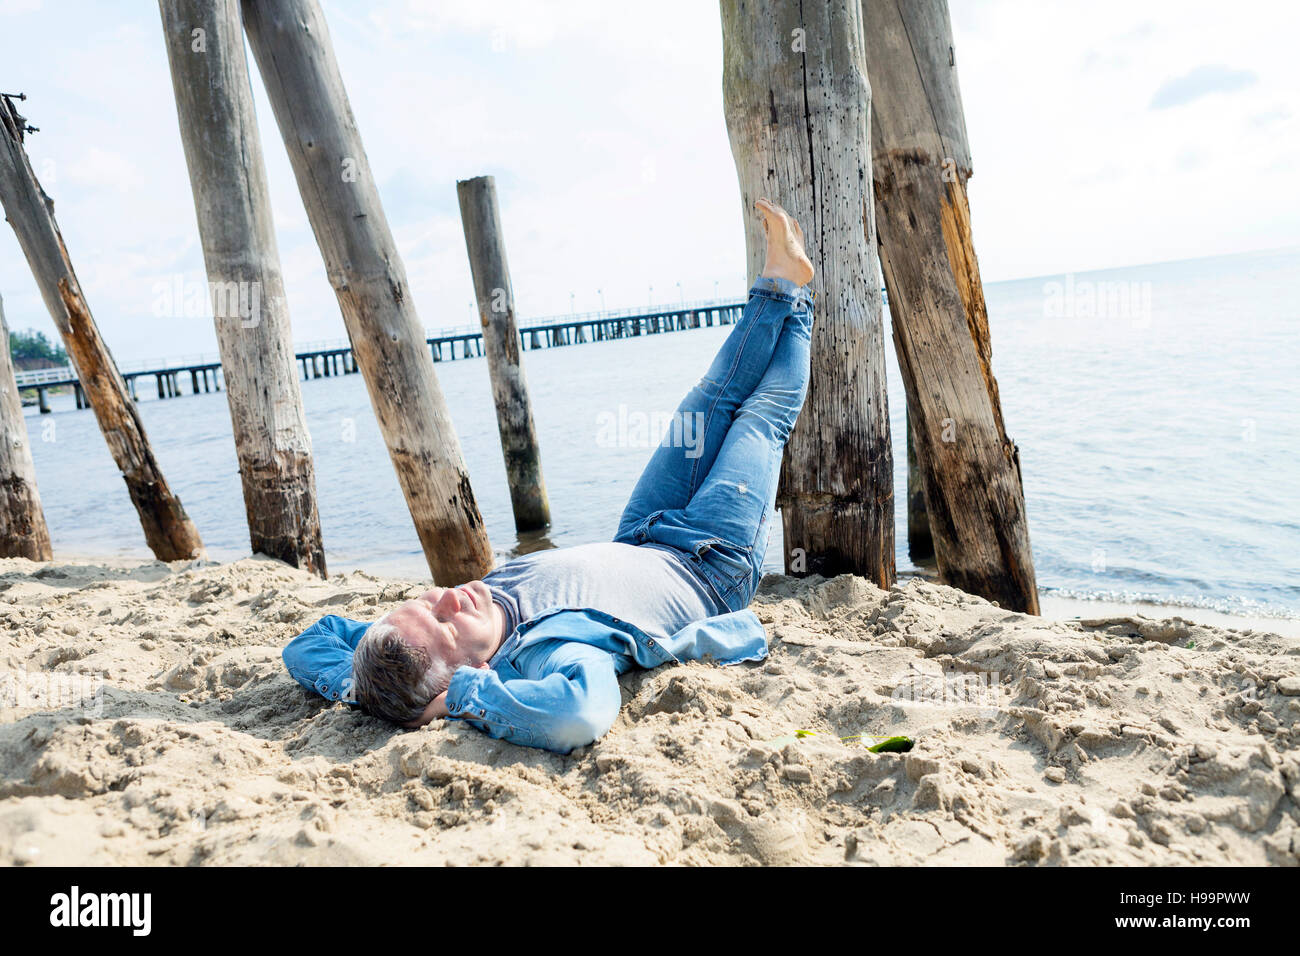 Man laying down on beach with feet up Stock Photo